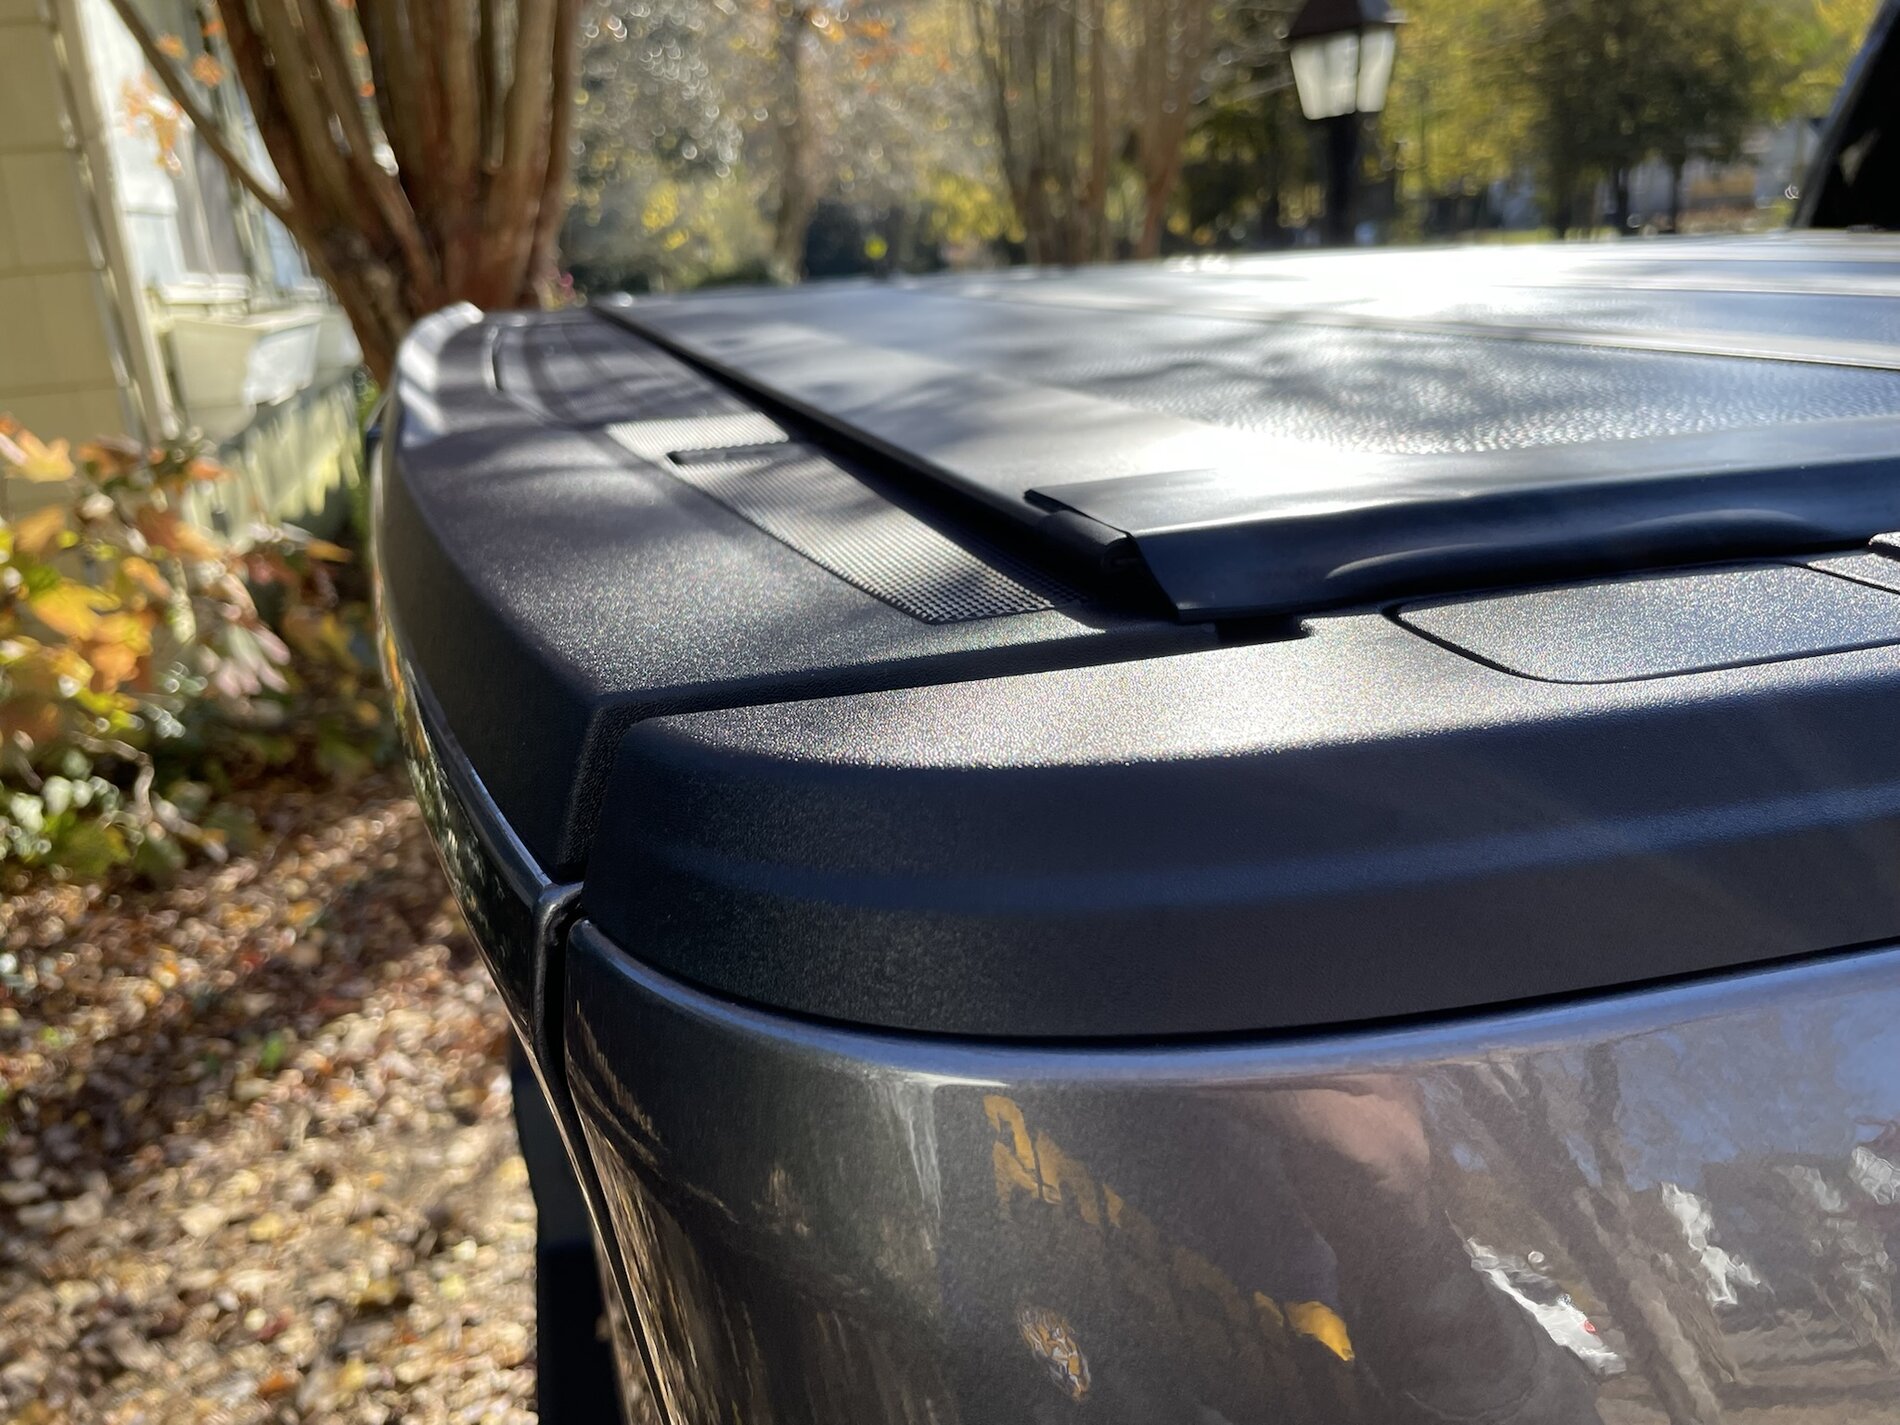 Ford F-150 Lightning Leer HF650M Tonneau Cover Review with Photos! - Install & First Impressions IMG_6478.JPEG